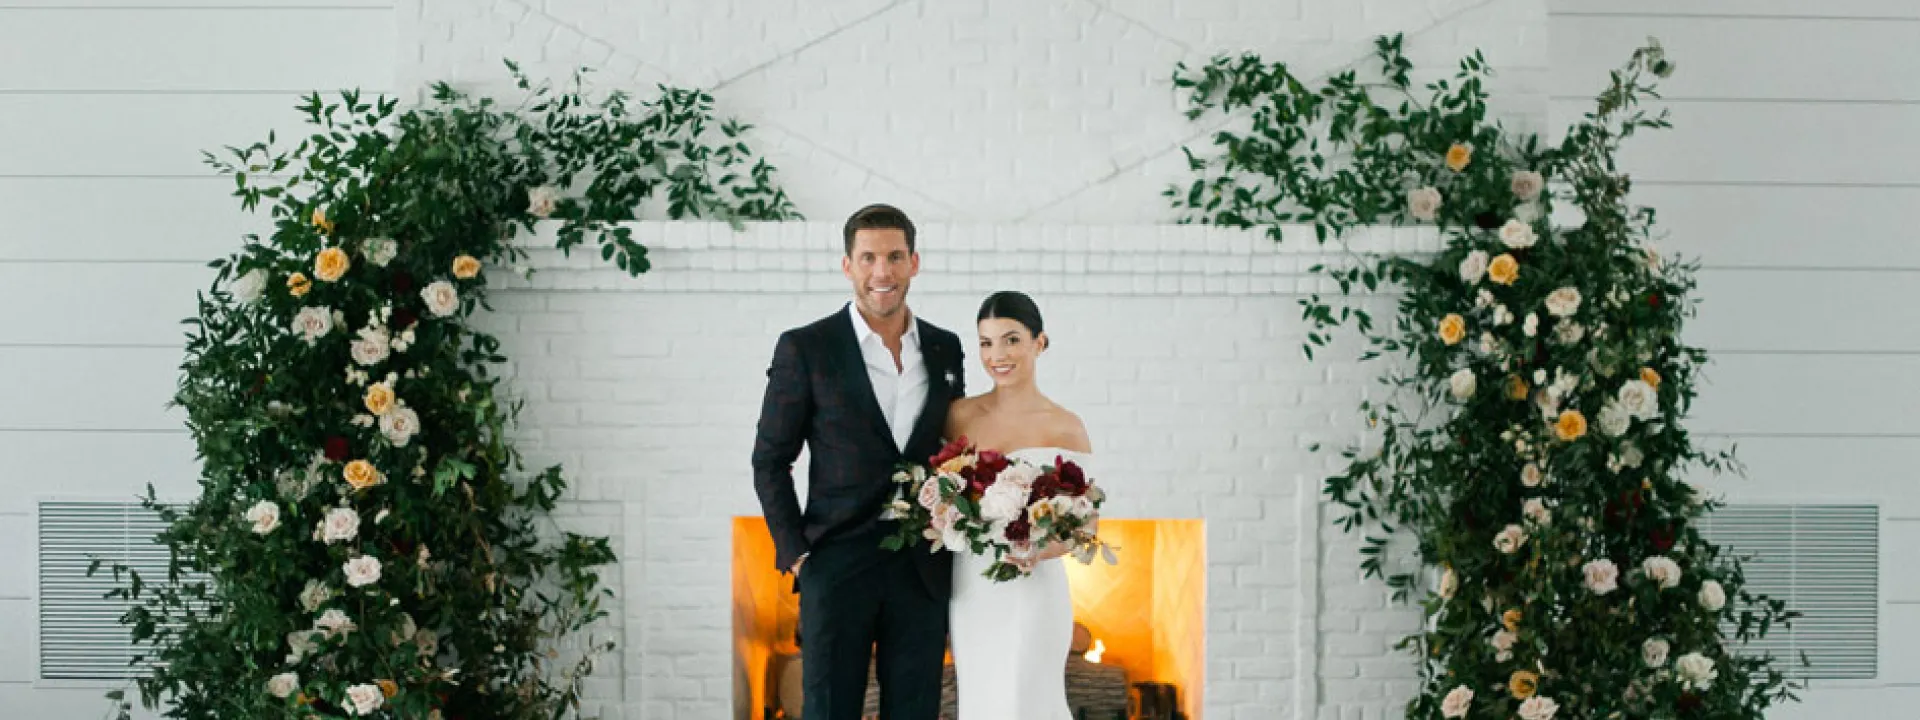 Sydney and Casey pose before the beautiful fireplace and their rosy floral installation at Hutton House